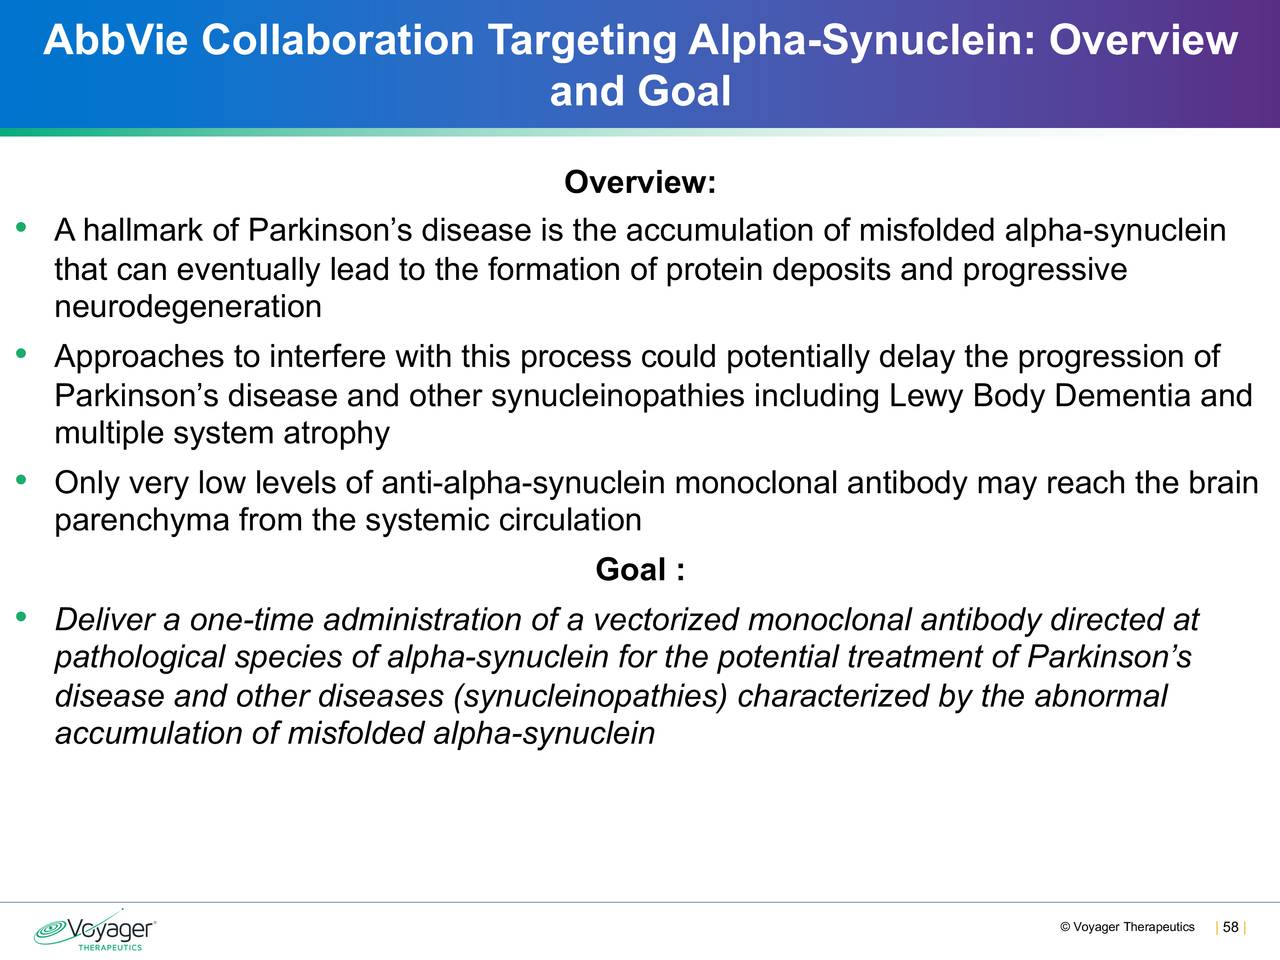 AbbVie Collaboration Targeting Alpha-Synuclein: Overview